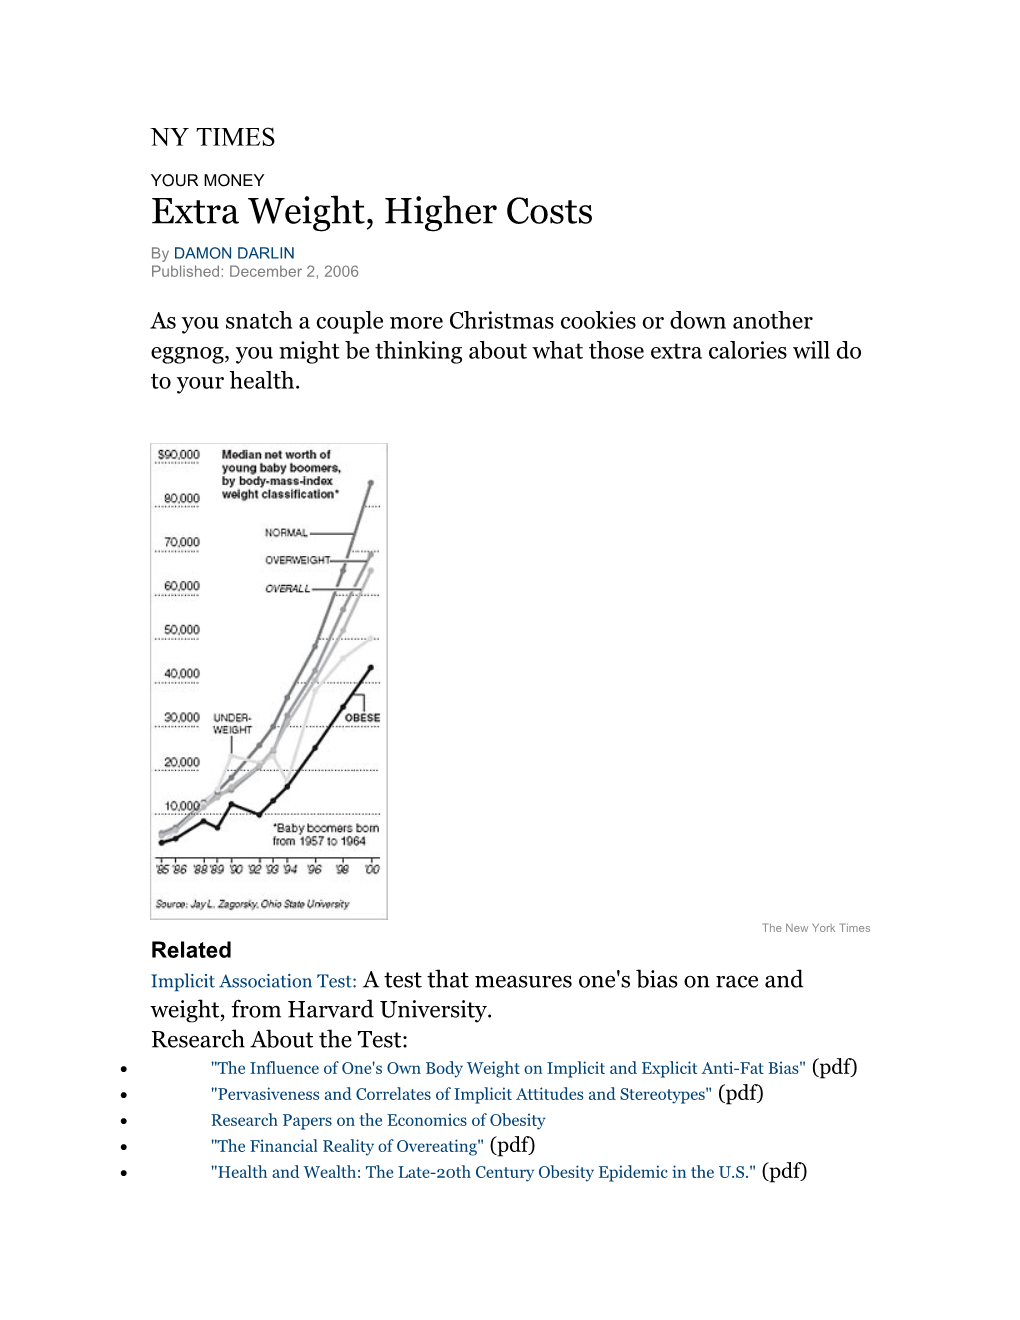 Extra Weight, Higher Costs